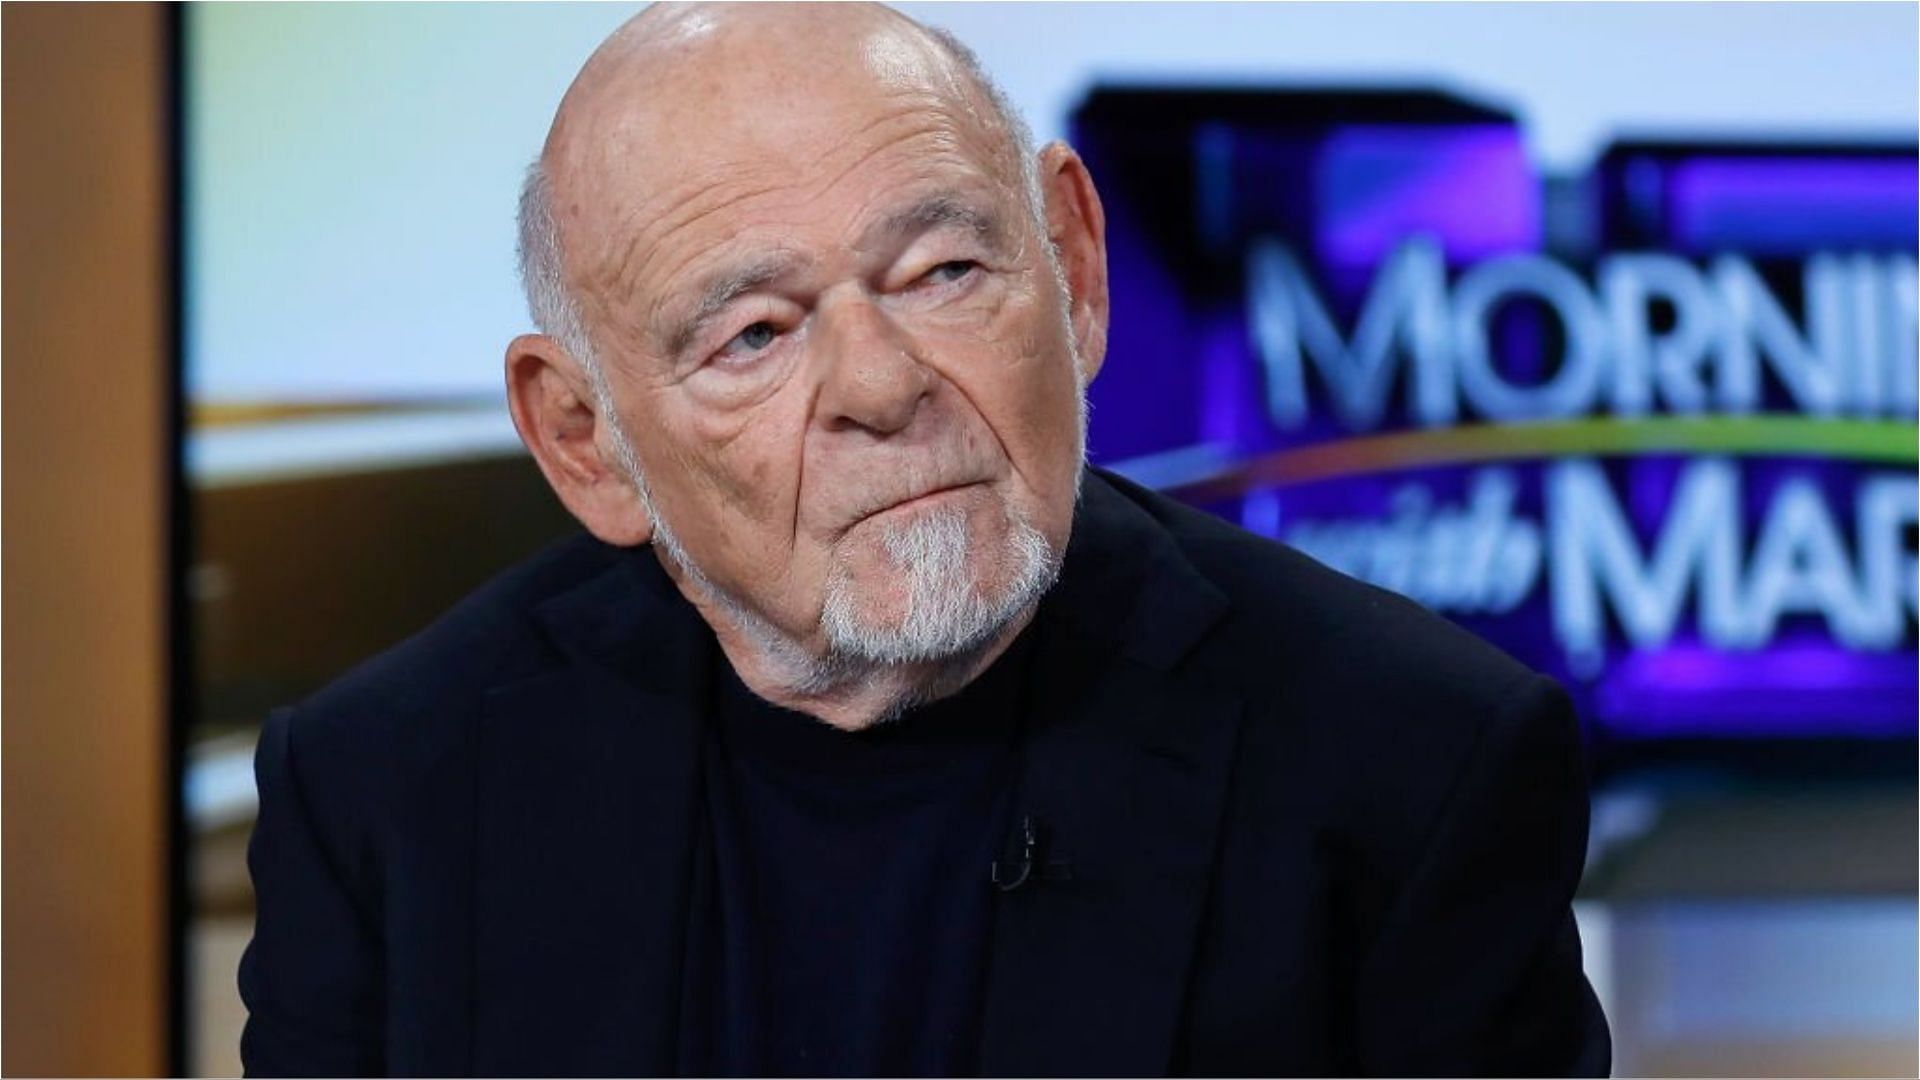 Sam Zell has accumulated a lot of wealth from his career as a businessman (Image via John Lamparski/Getty Images)